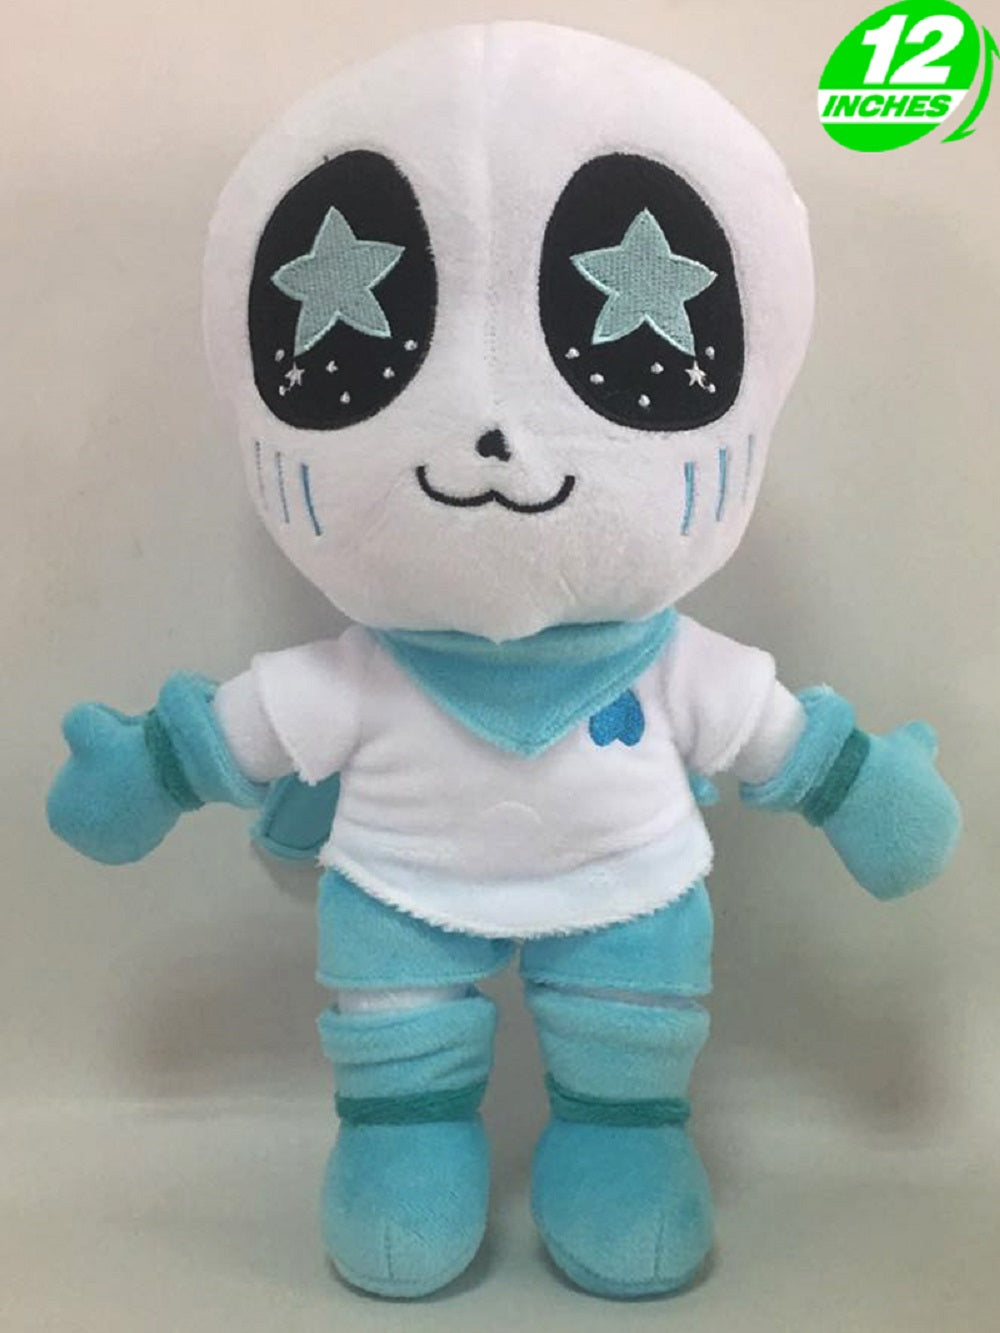 Undertale Sans Plush Doll - Super Anime Store FREE SHIPPING FAST SHIPPING USA